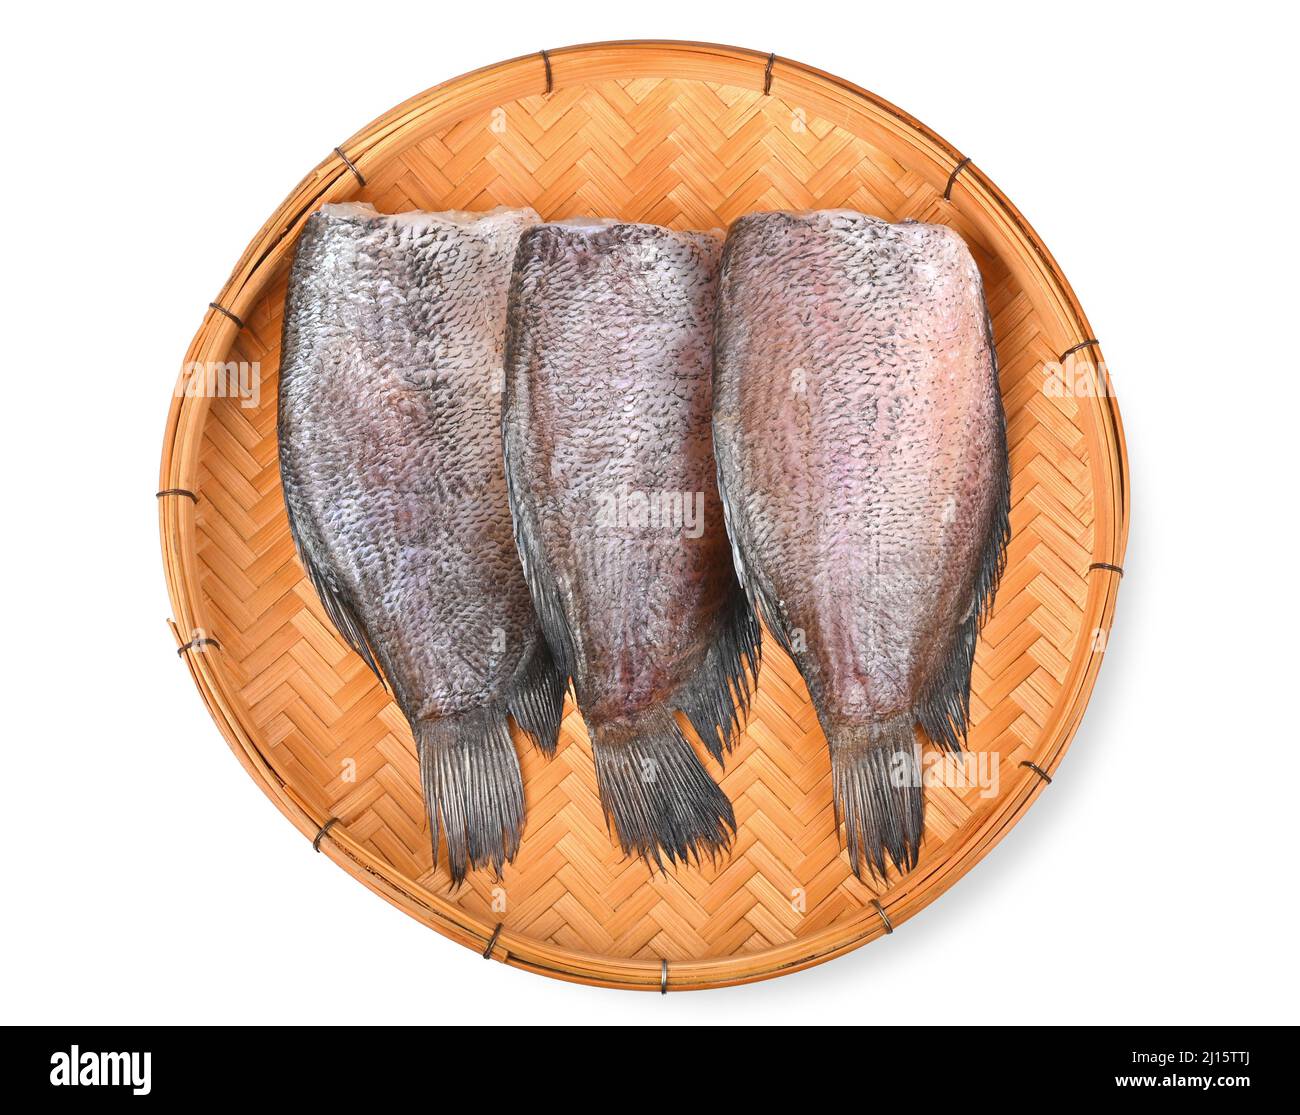 Sun dried fish, SnakeSkin Gourami Fish, Pla Salit (Trichogaster pectoralis) isolated on white background. Top view Stock Photo